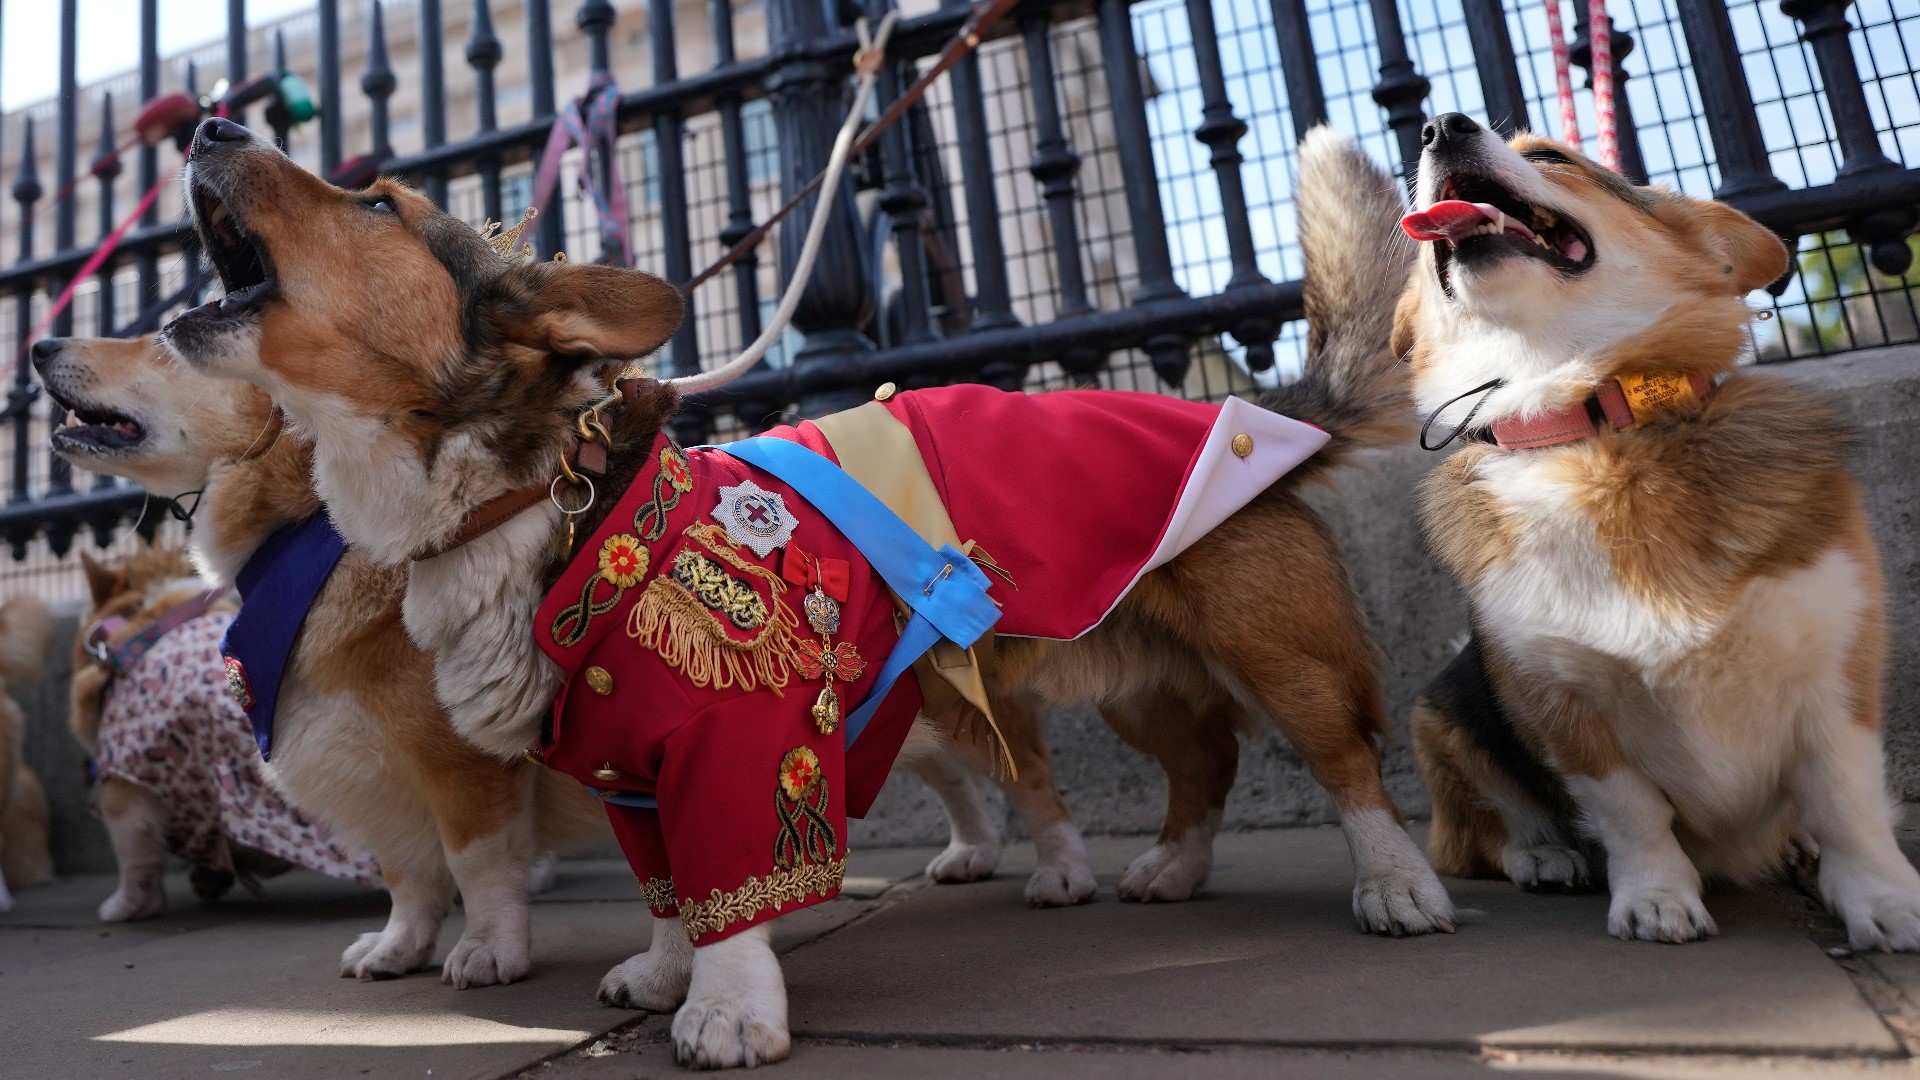 Corgis from across the United Kingdom gathered outside Buckingham Palace on Sunday as owners paid tribute to the late Queen Elizabeth II.